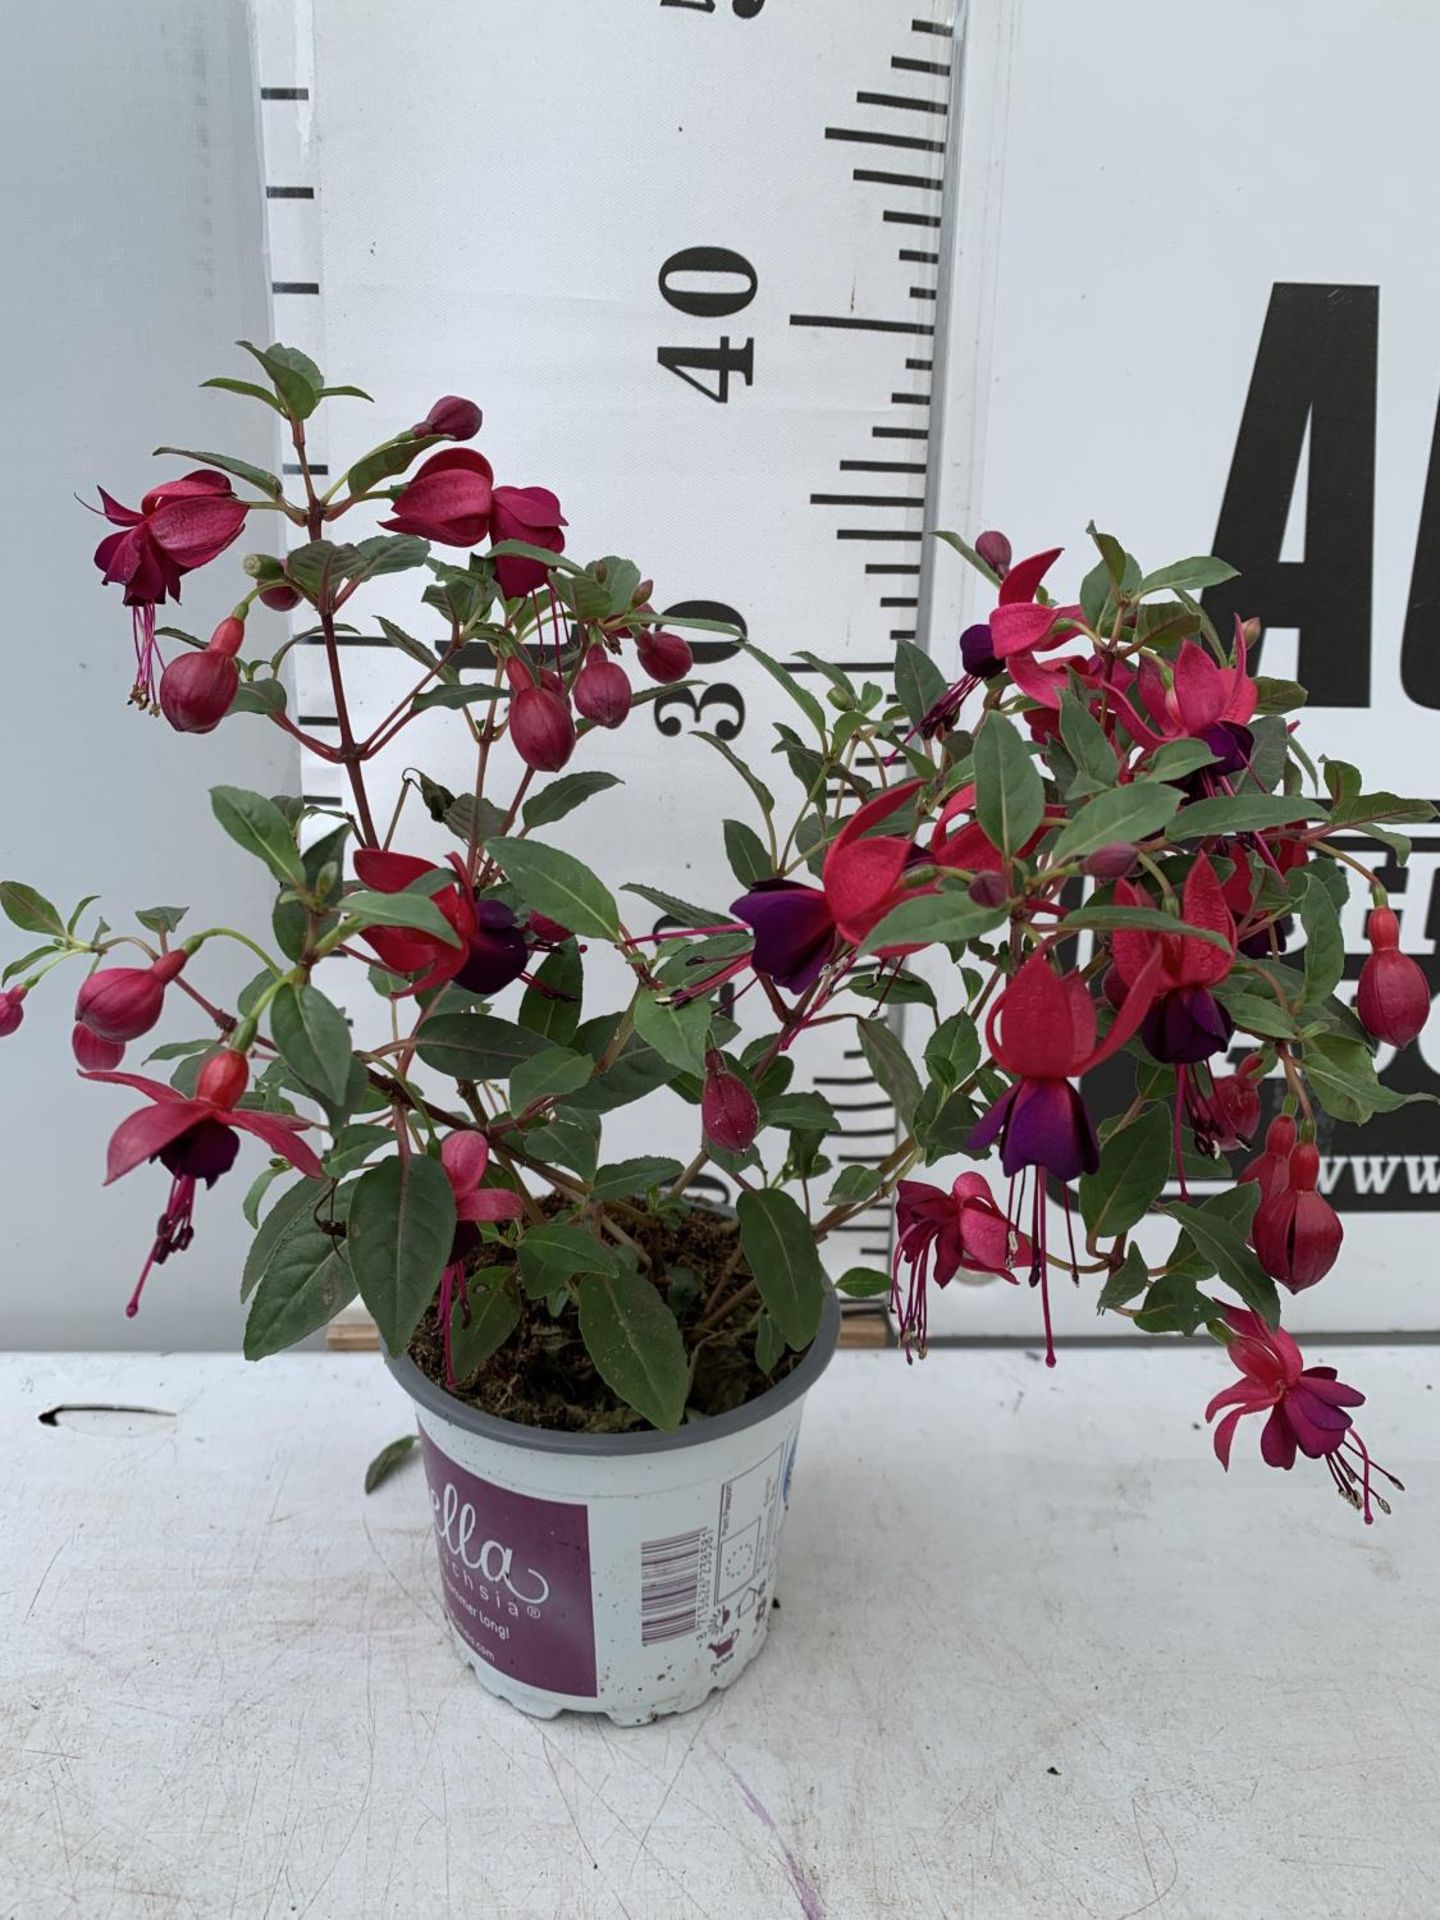 NINE FUCHSIA BELLA IN 20CM POTS 20-30CM TALL TO BE SOLD FOR THE NINE PLUS VAT - Image 7 of 8